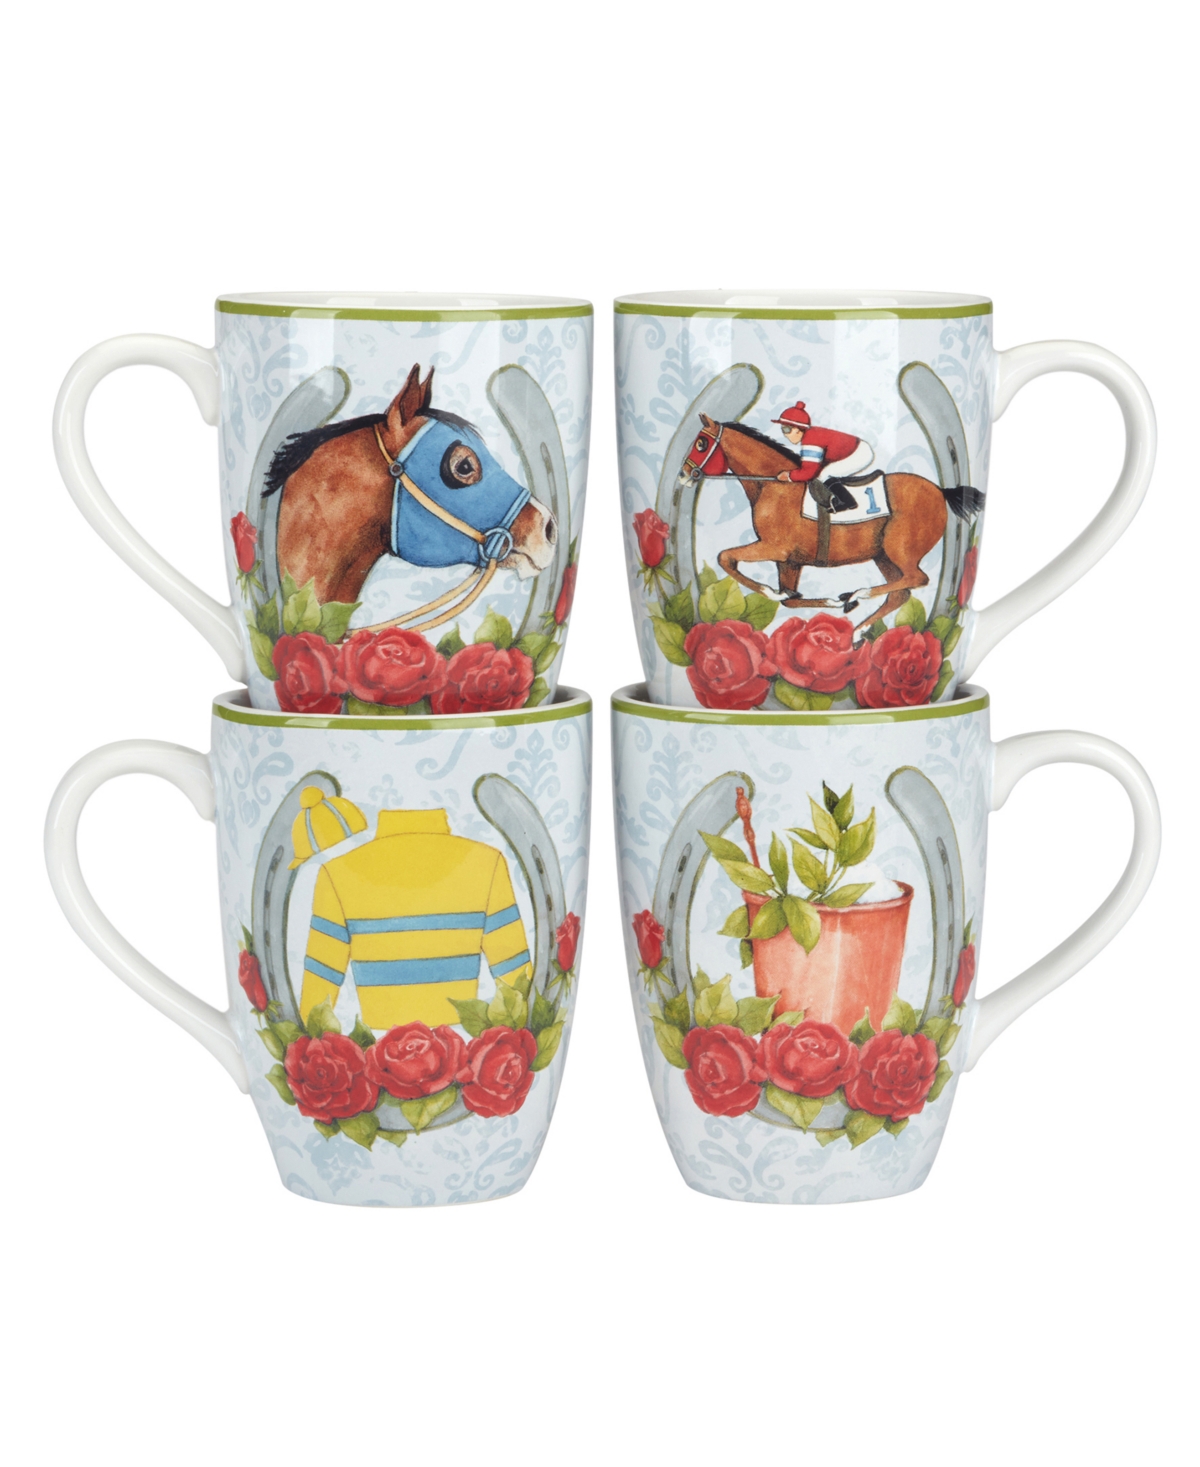 Derby Day at the Races Set of 4 Mugs - Miscellaneous